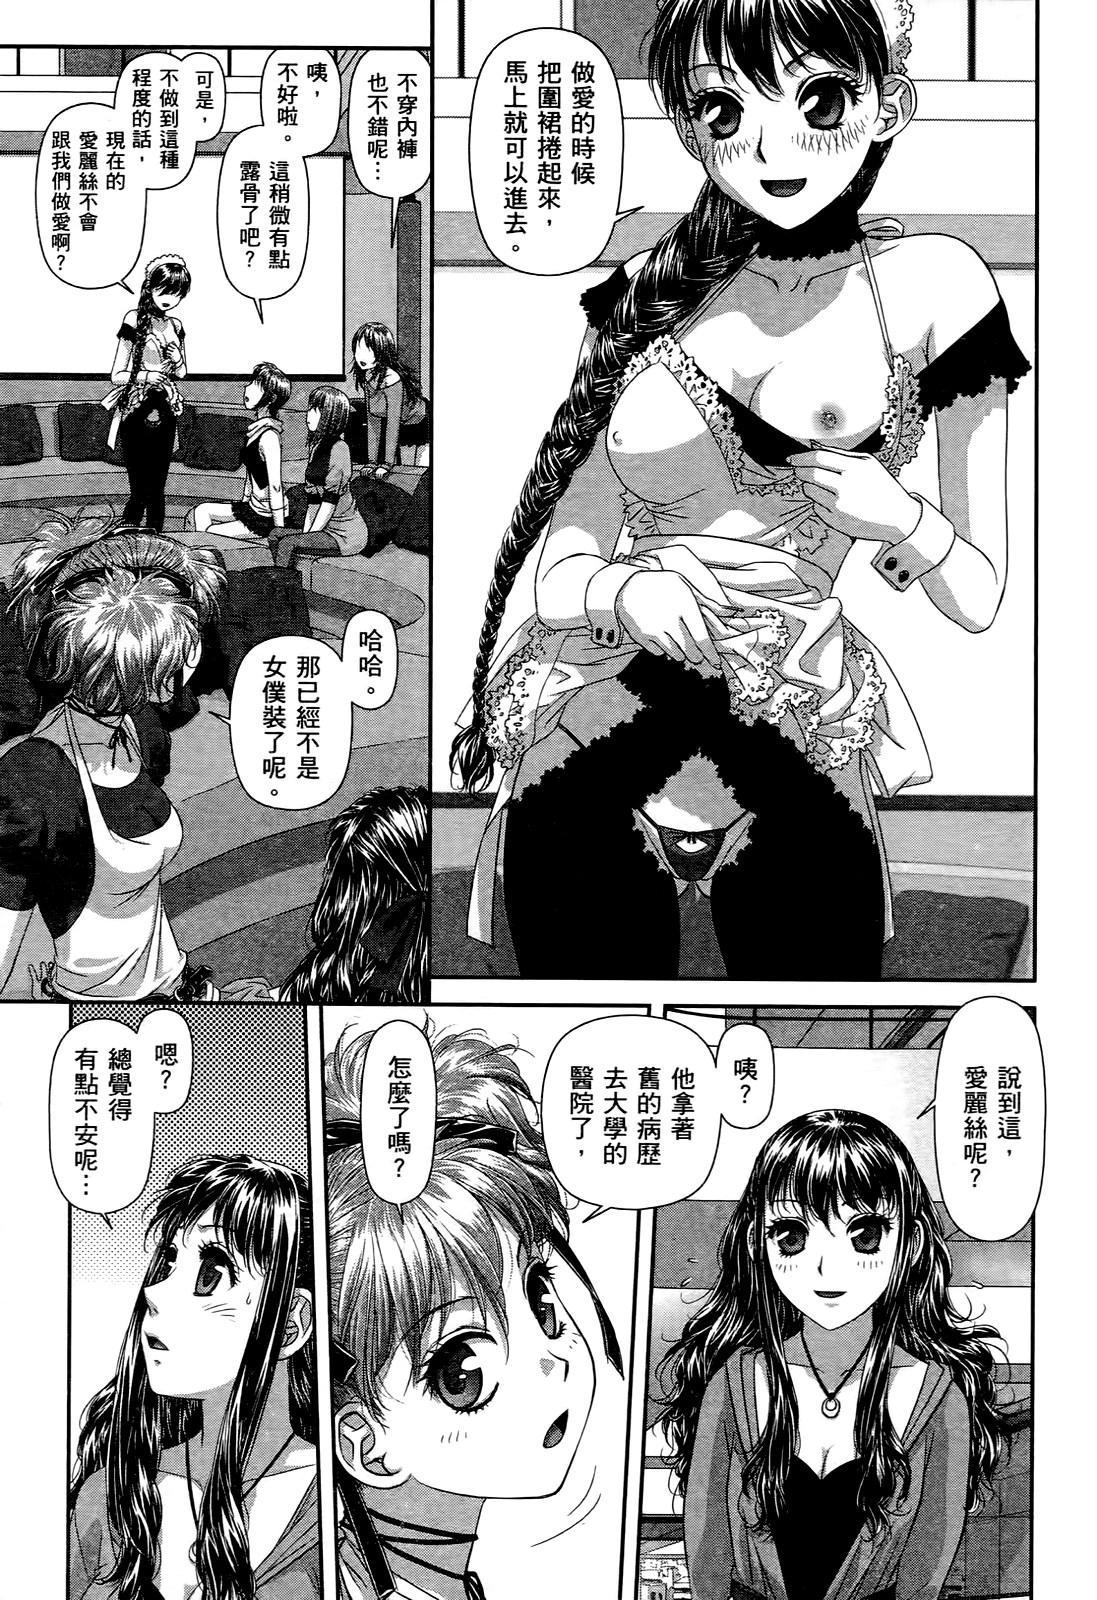 Blowing My doll house 3 | 甜蜜寶貝屋 3 Gay College - Page 5